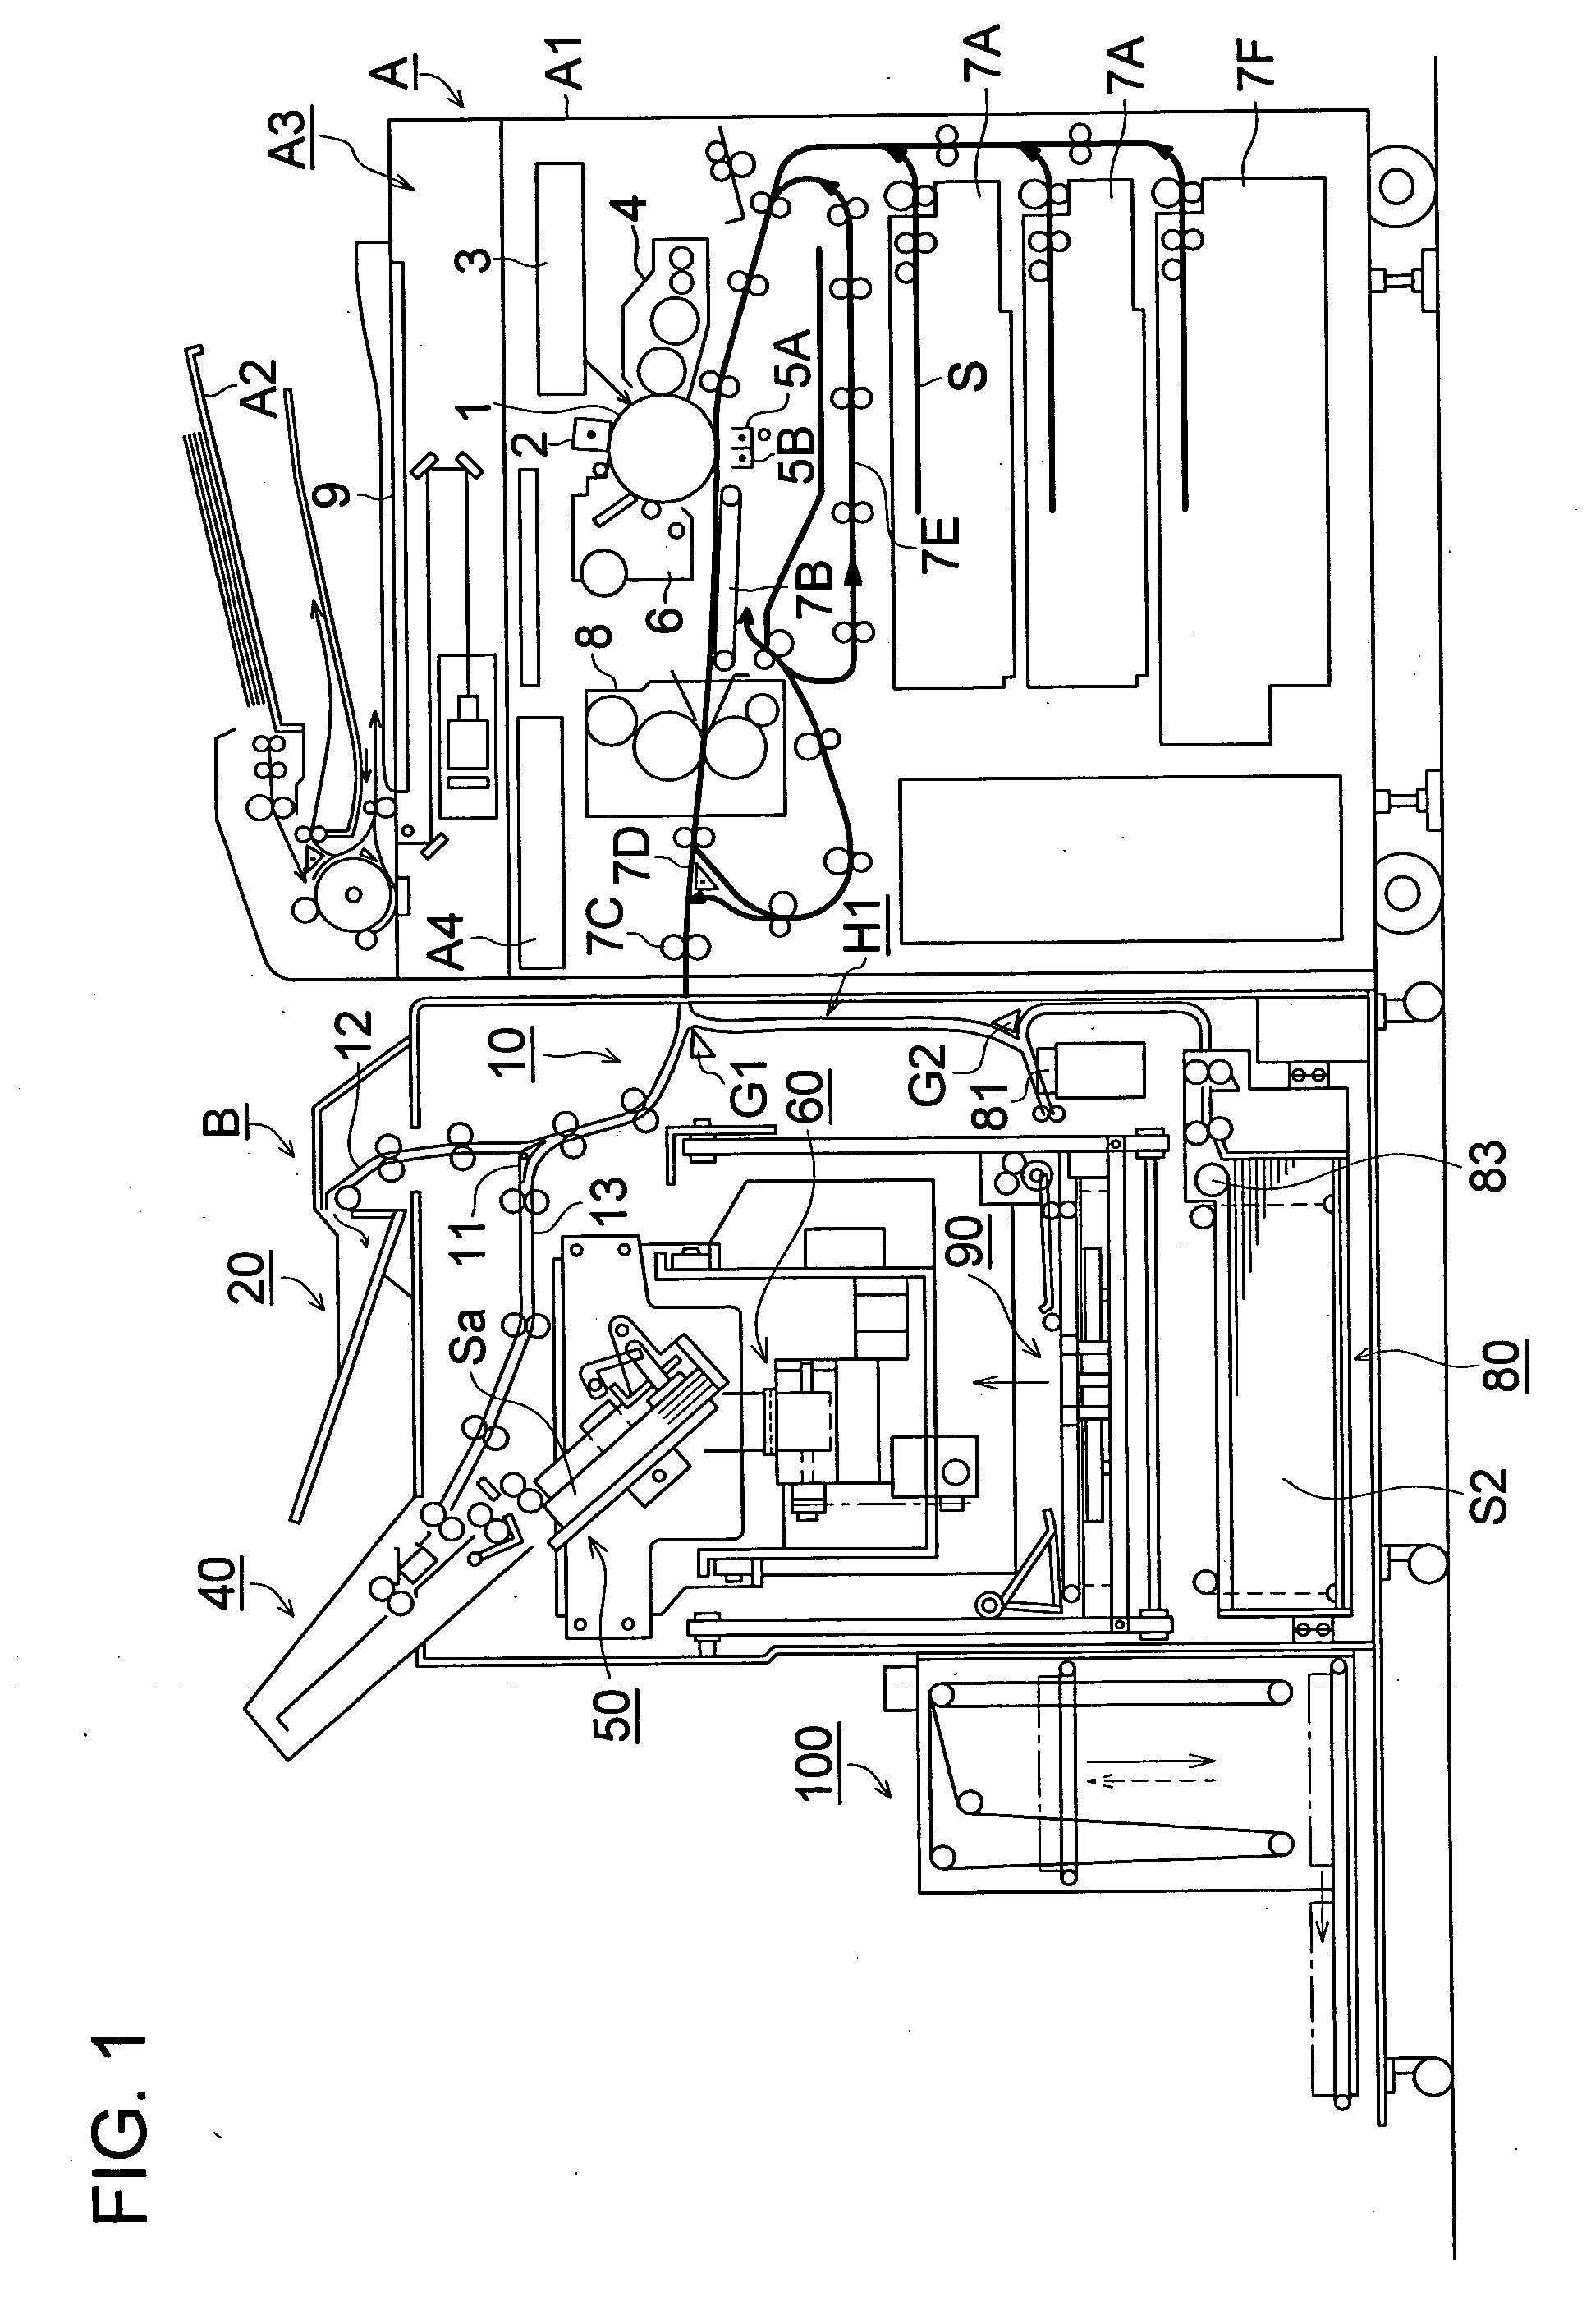 Bookbinding system, image forming apparatus, and bookbinding apparatus